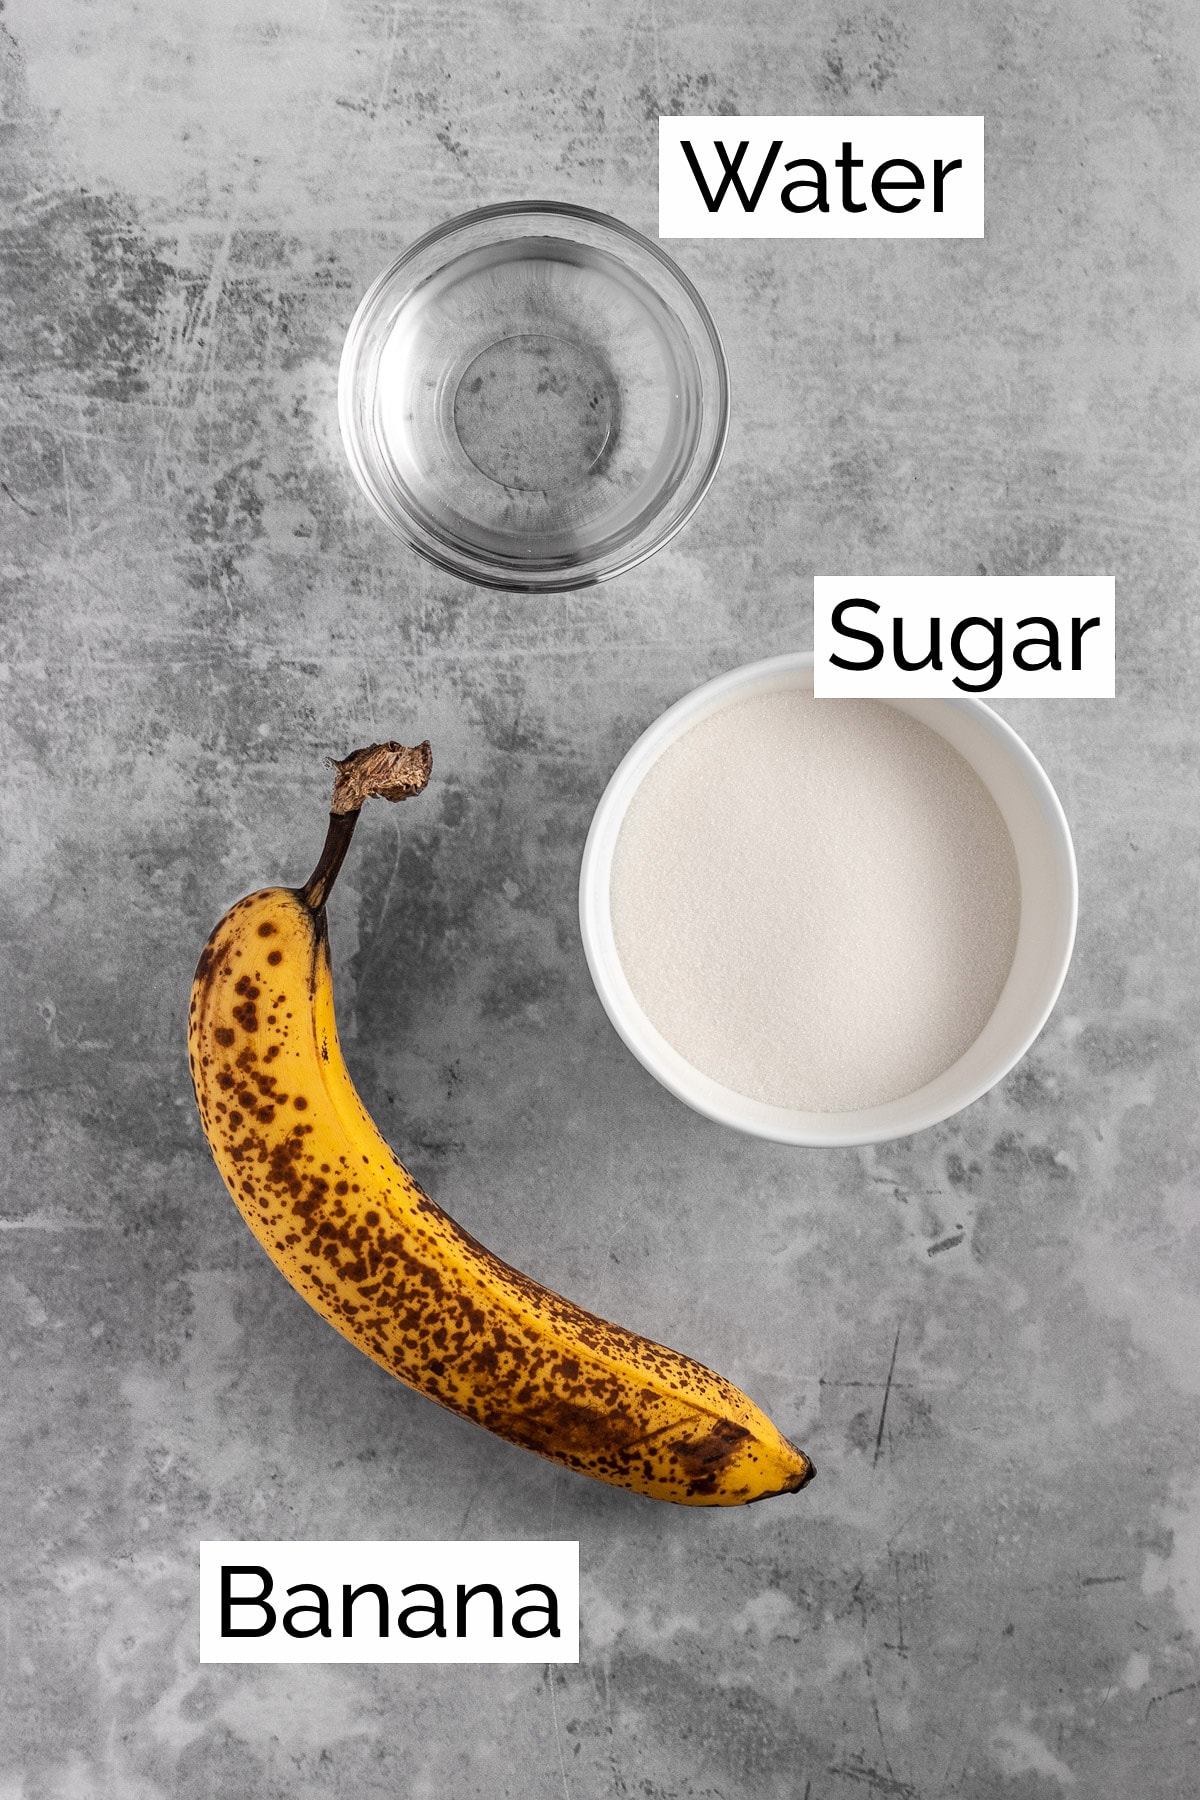 The ingredients needed to make the banana syrup.